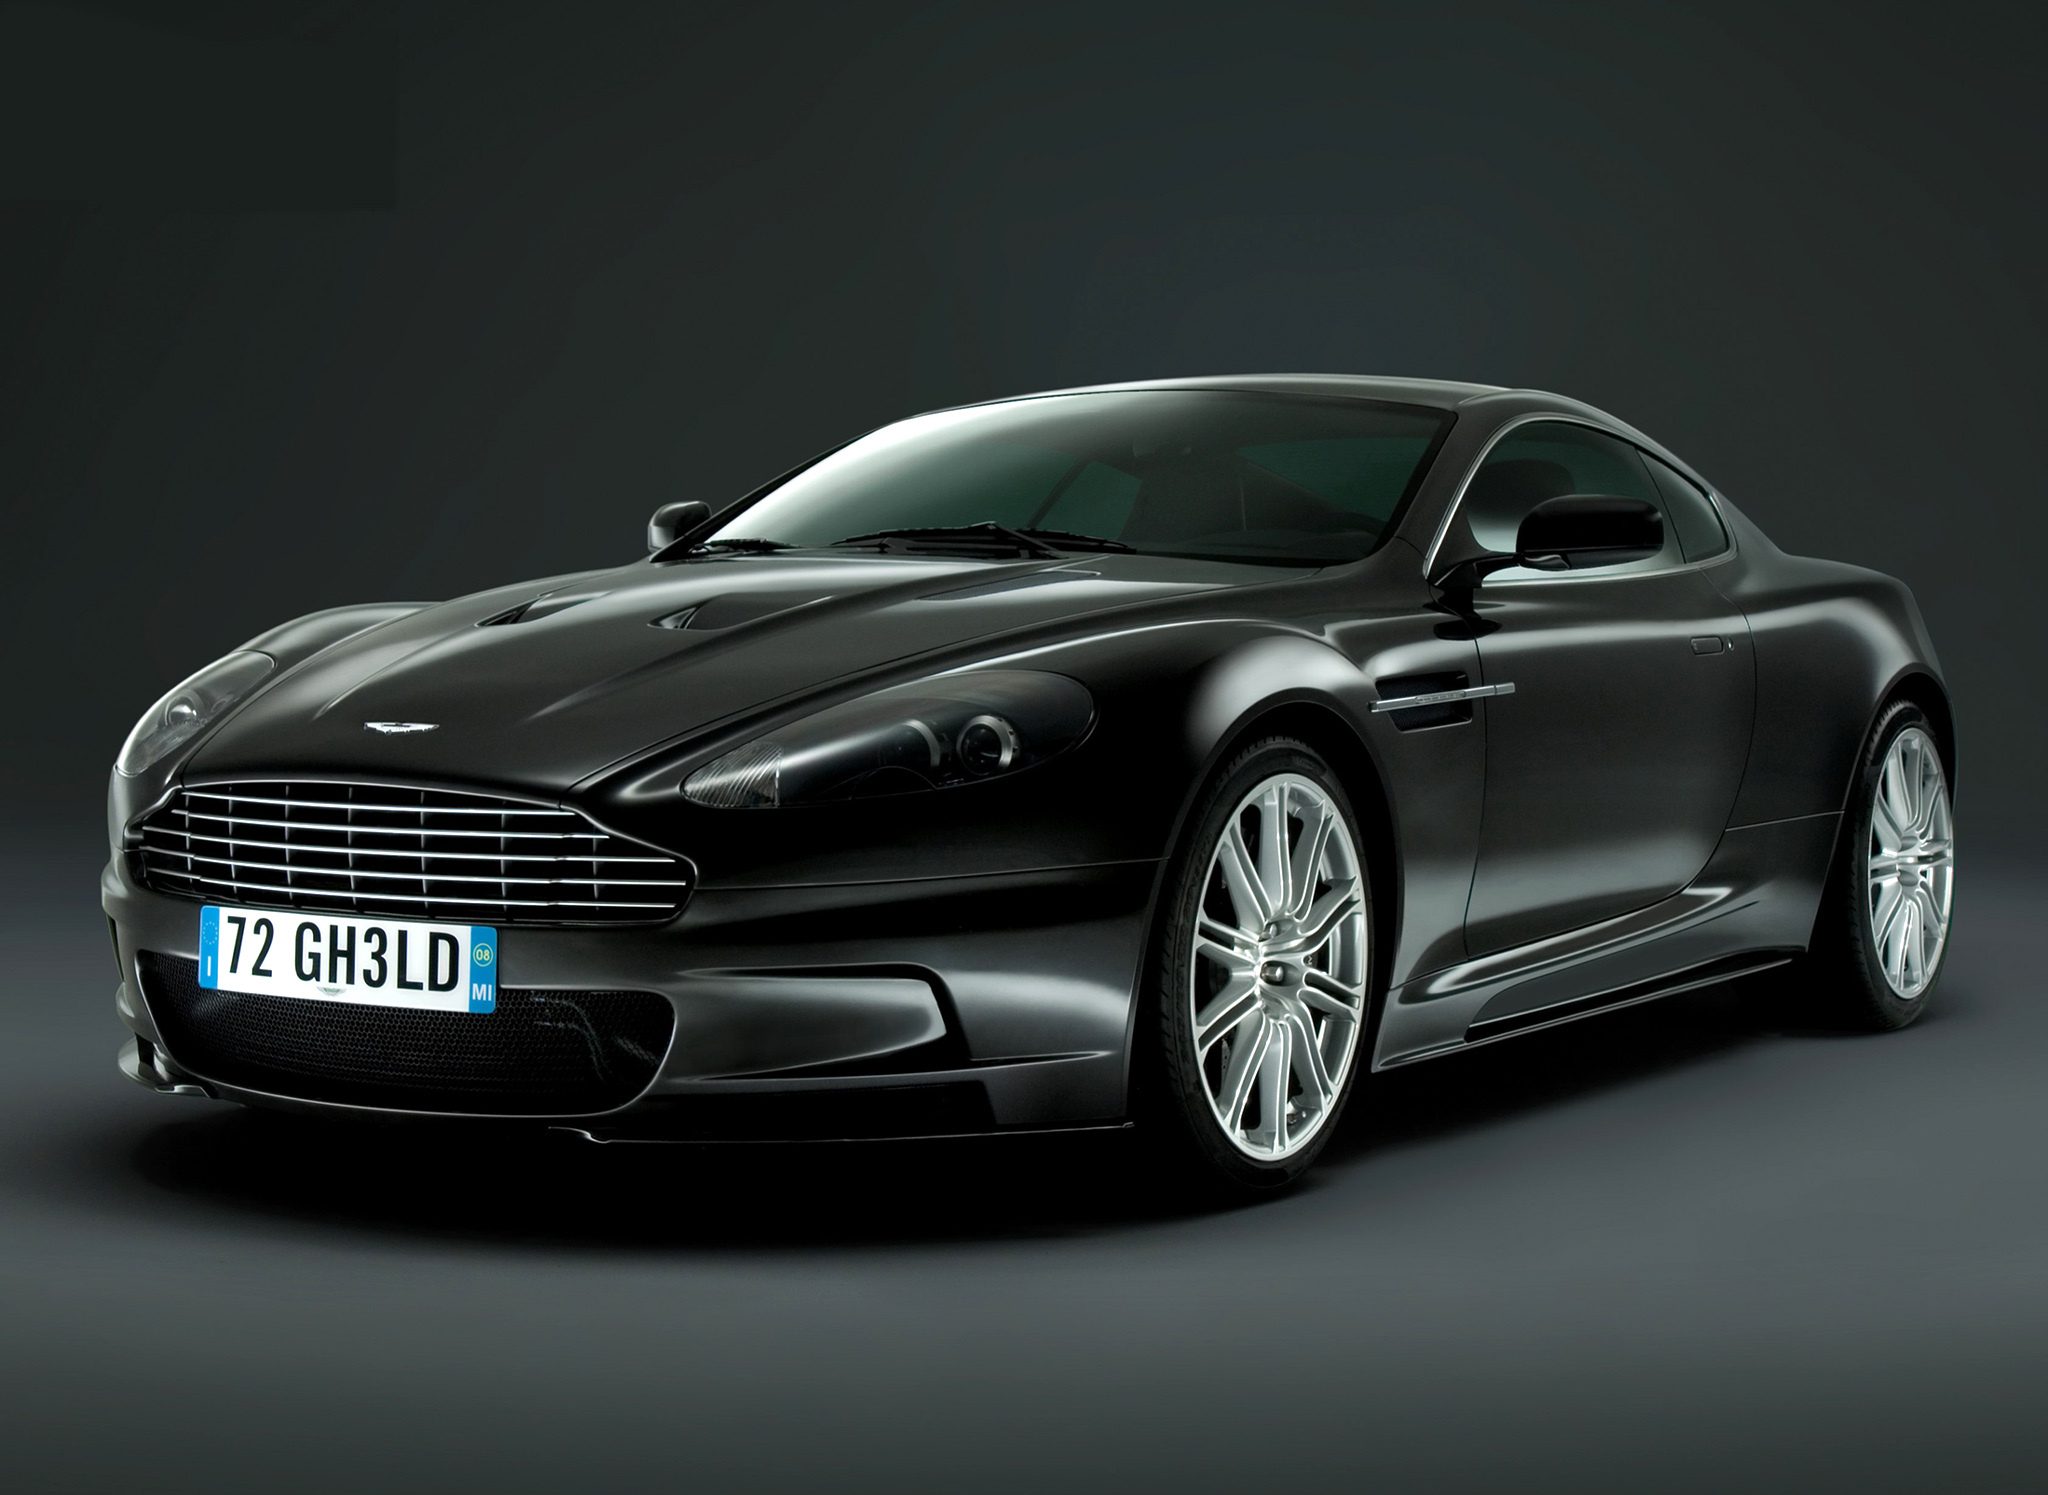 2008 Aston Martin DBS 007 Quantum of Solace Wallpapers | SuperCars.net